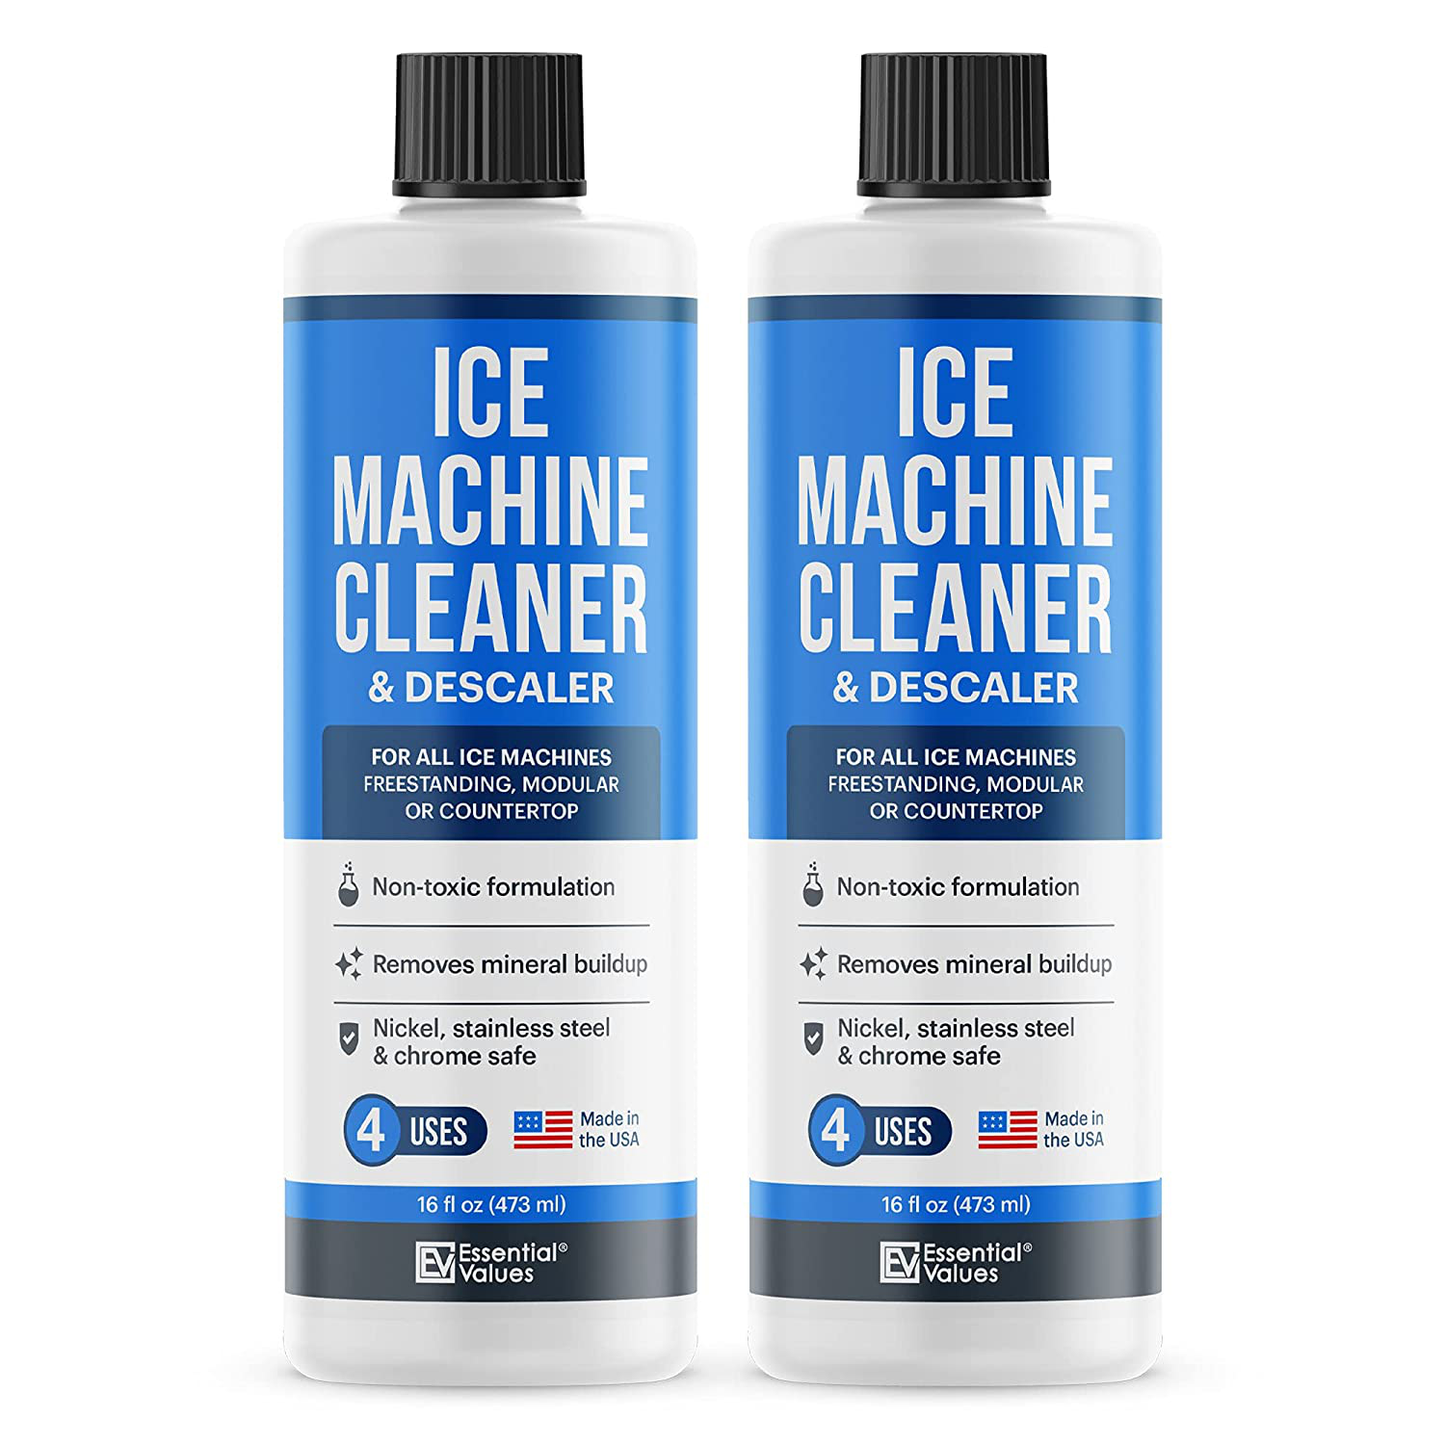 2-Pack Essential Values Ice Machine Cleaner 16 fl oz, Nickel Safe Descaler | Ice Maker Cleaner Compatible with All Major Brands - Made in USA